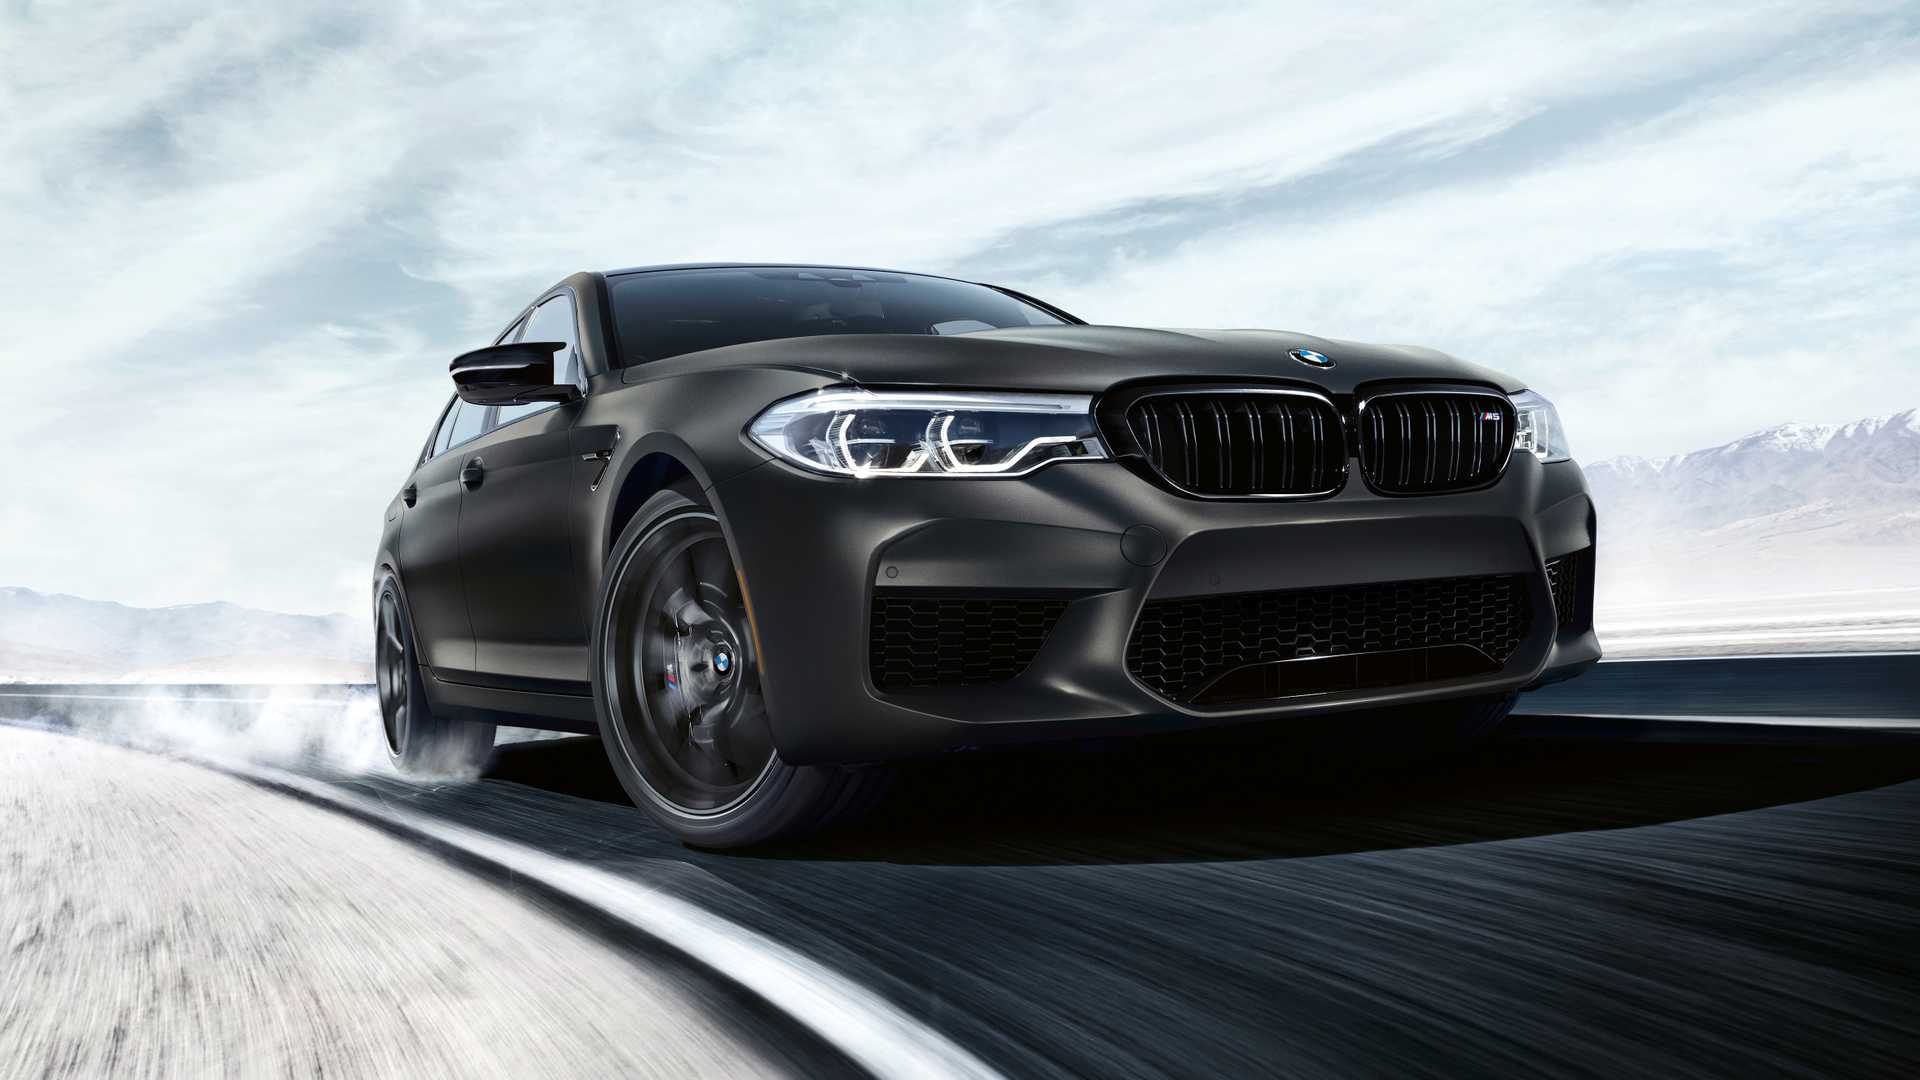 BMW M5 Edition 35 Years Wallpaper (HD Image)